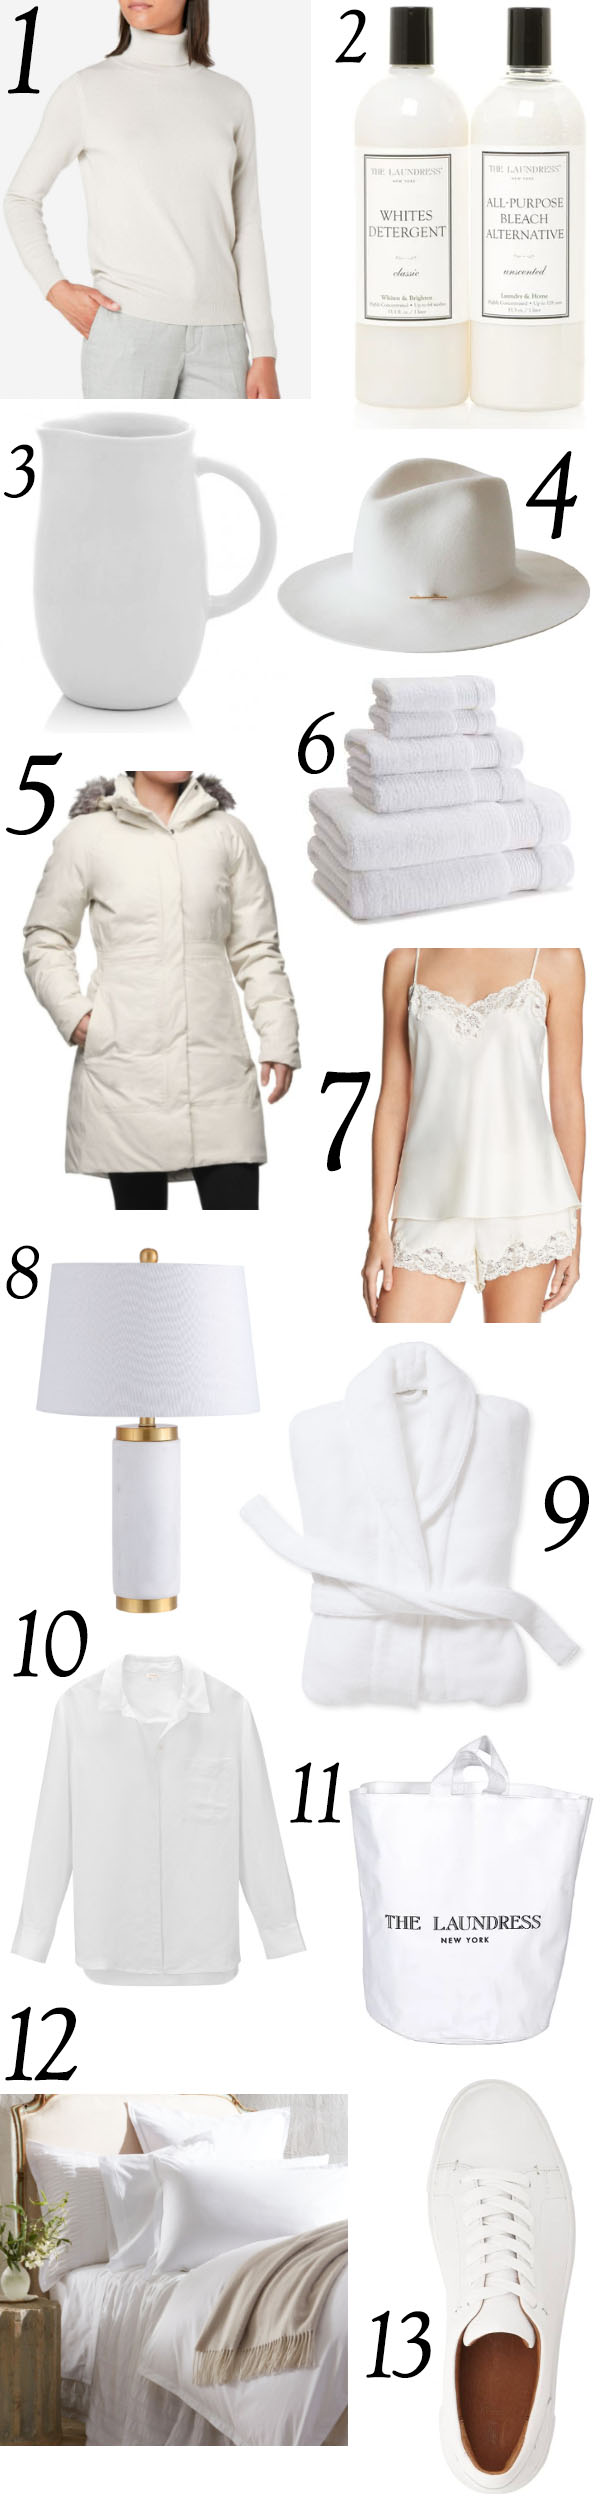 collage of white clothes, accessories and home goods